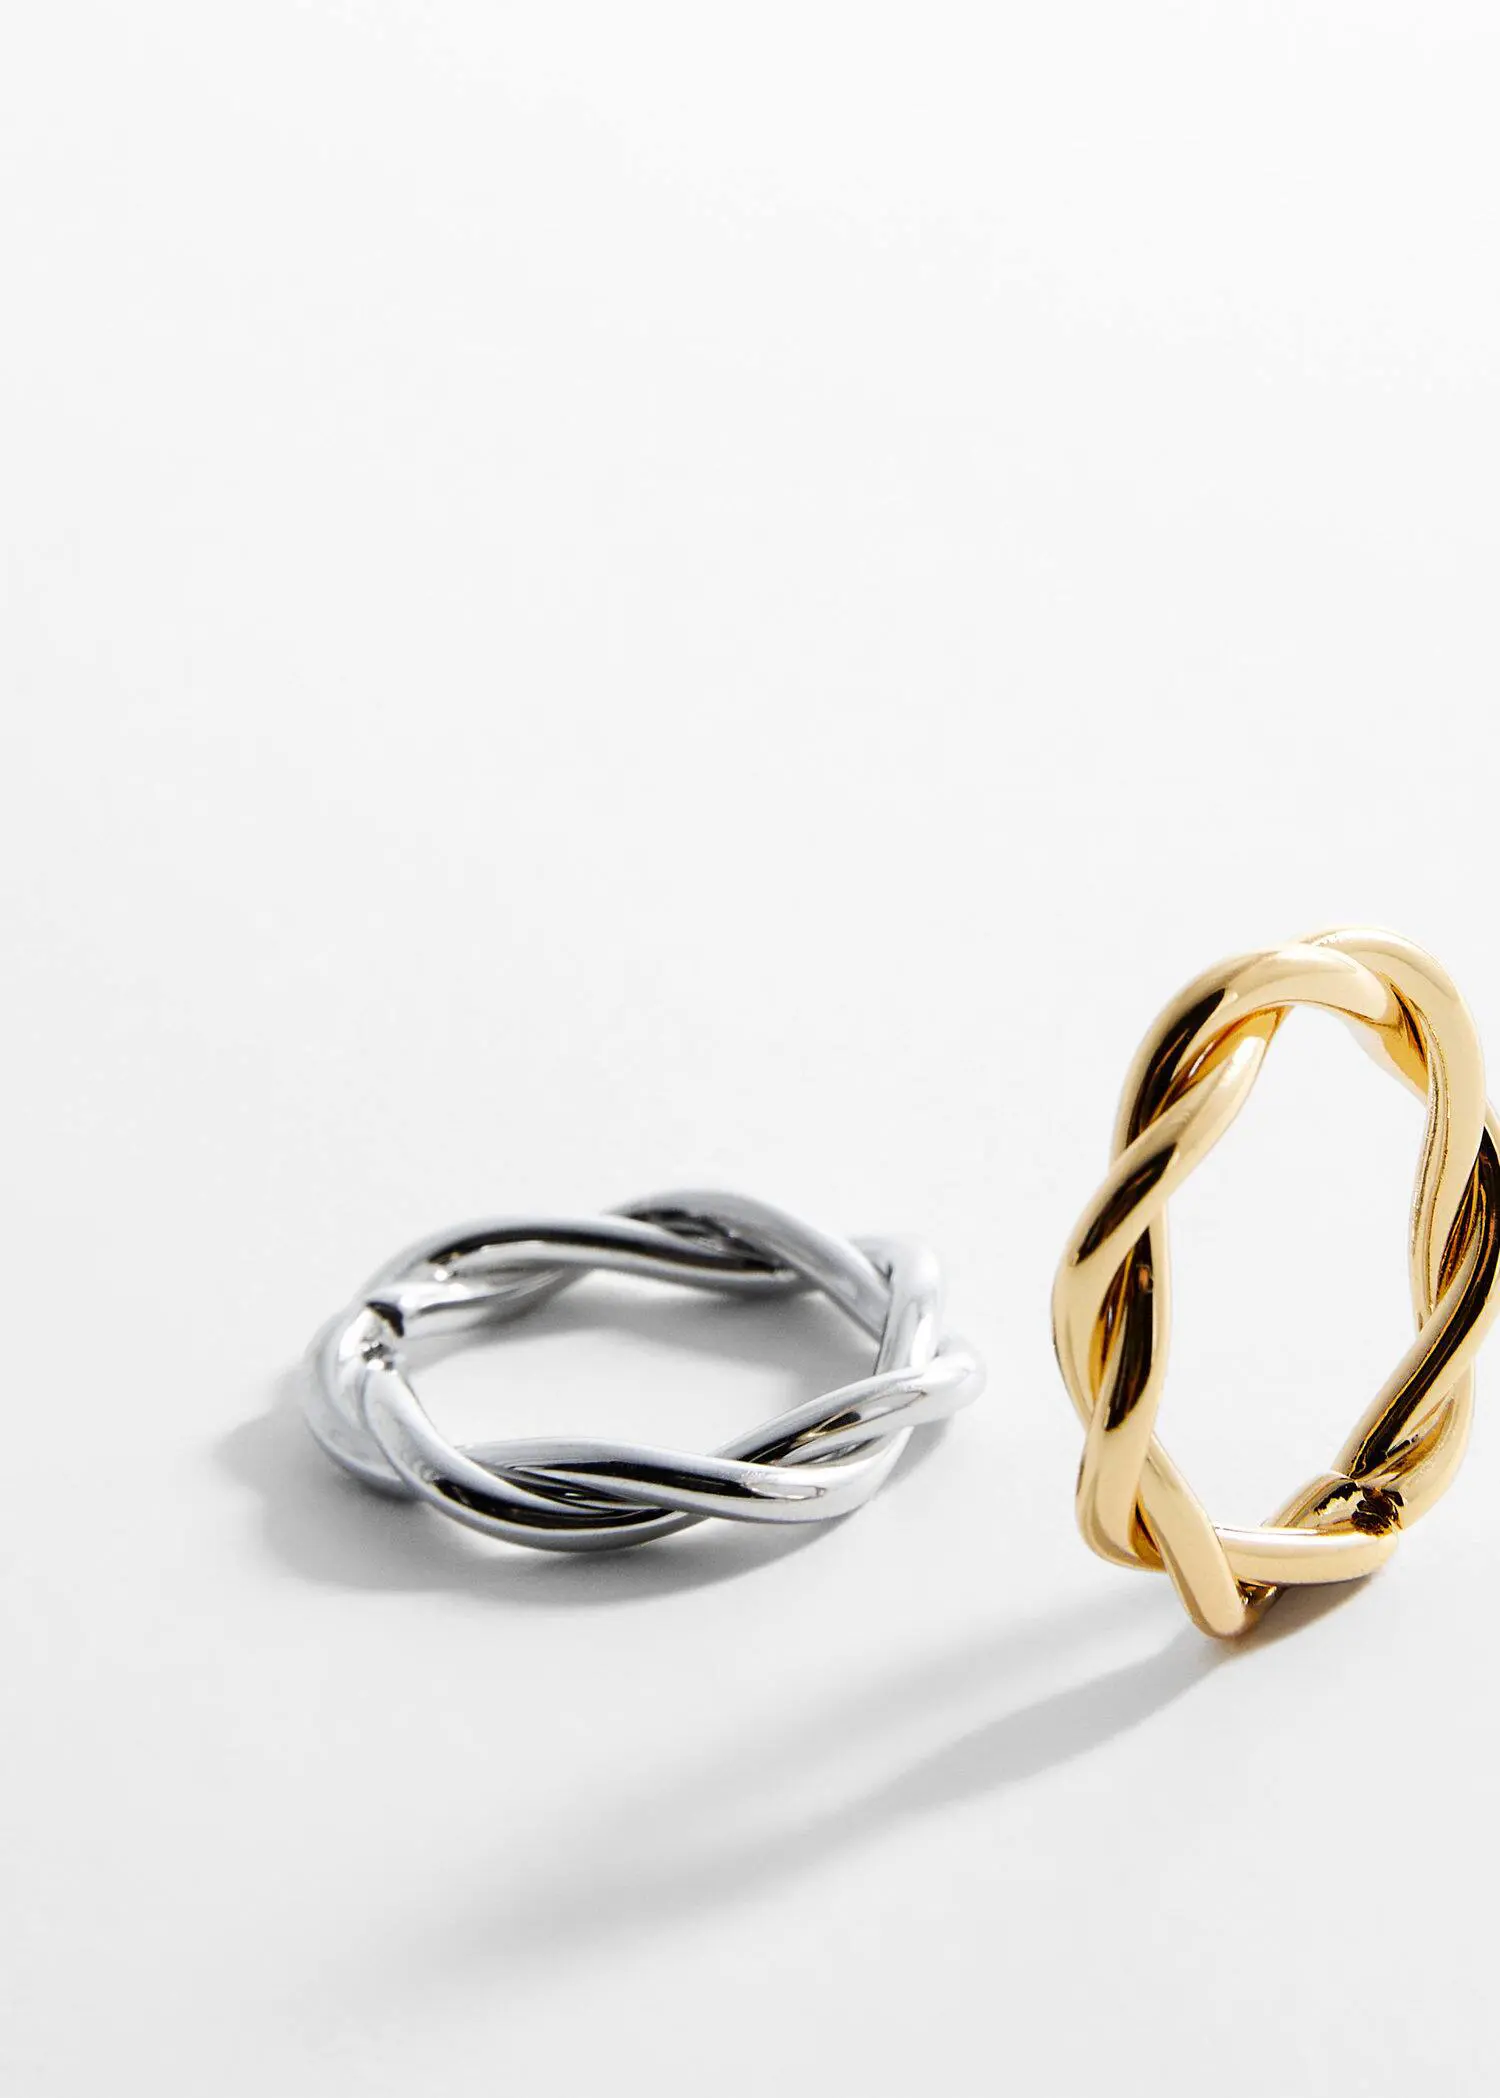 Mango Interlocking rings set. a pair of gold and silver rings sitting next to each other. 